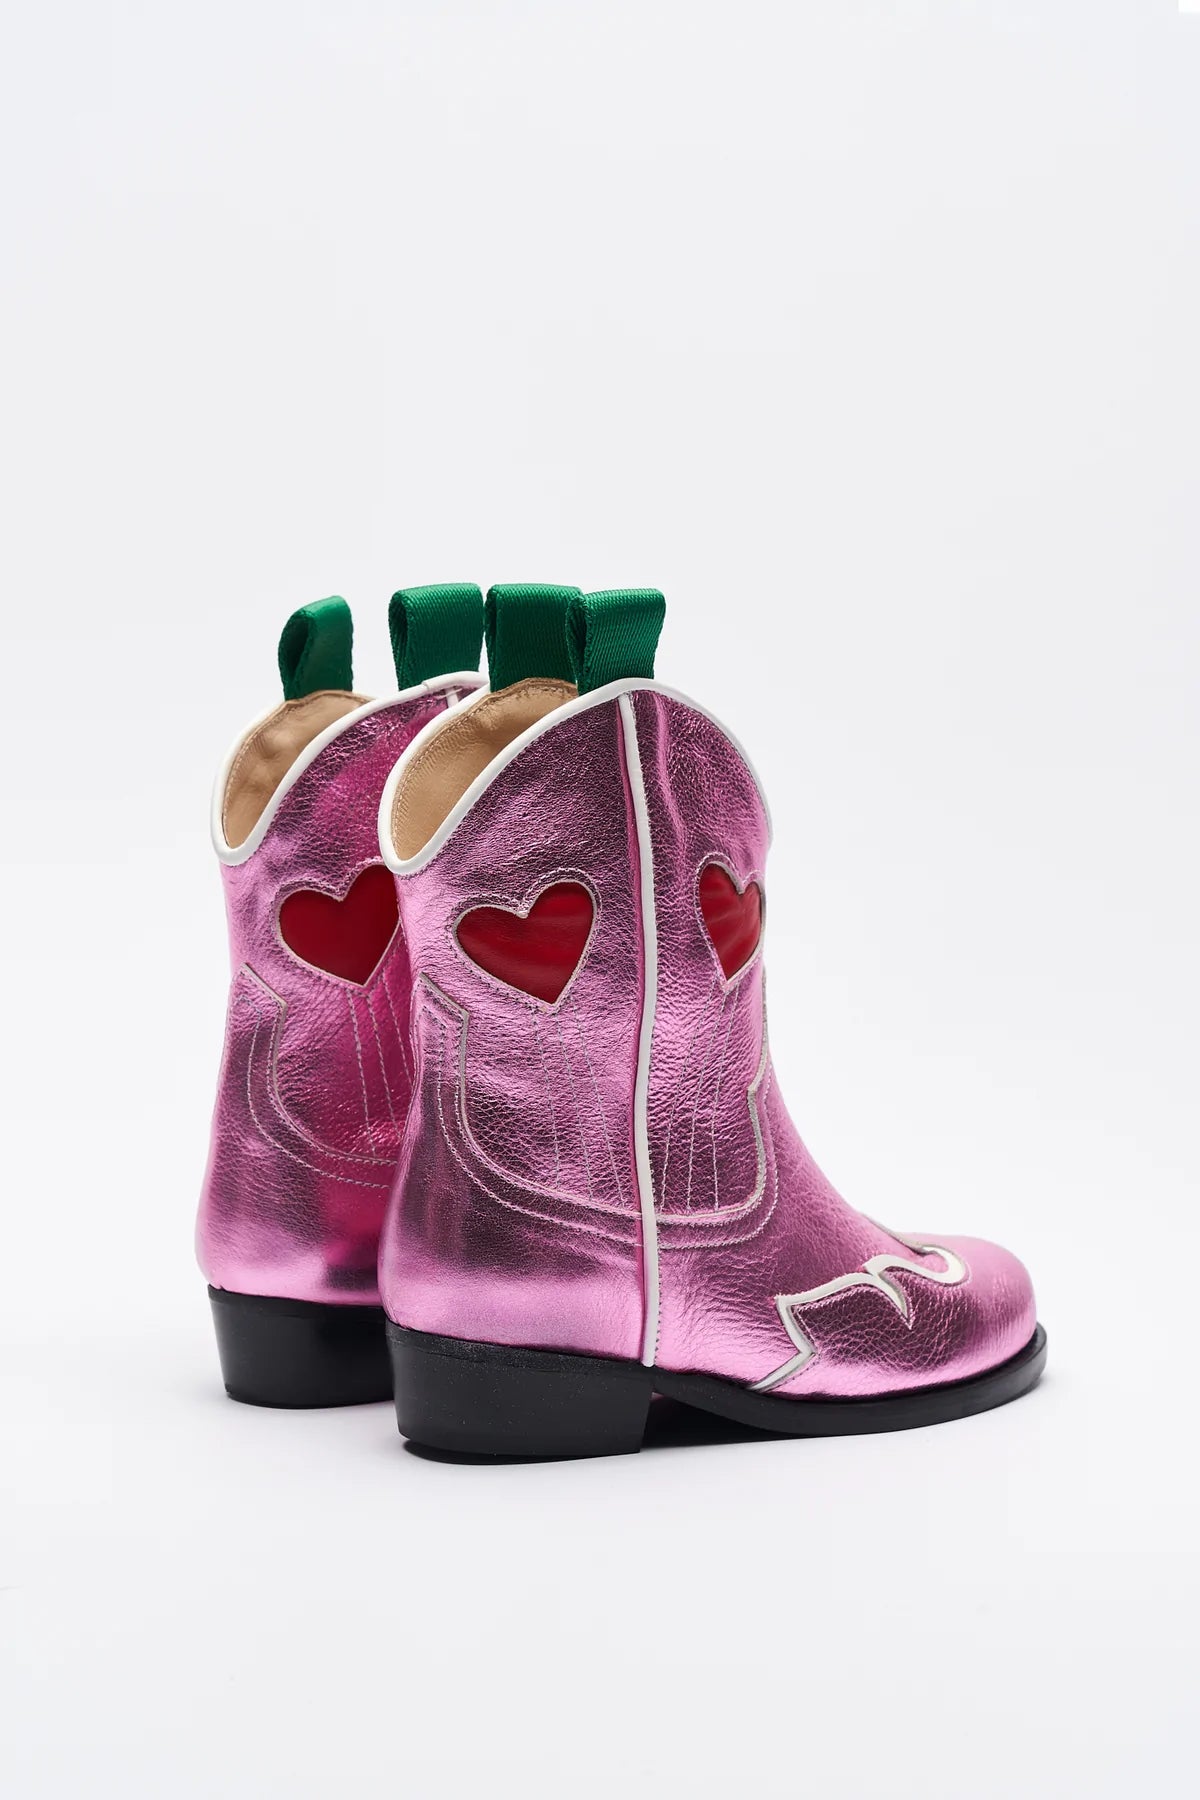 Sweetheart Pink Boots 34(20.5cm)